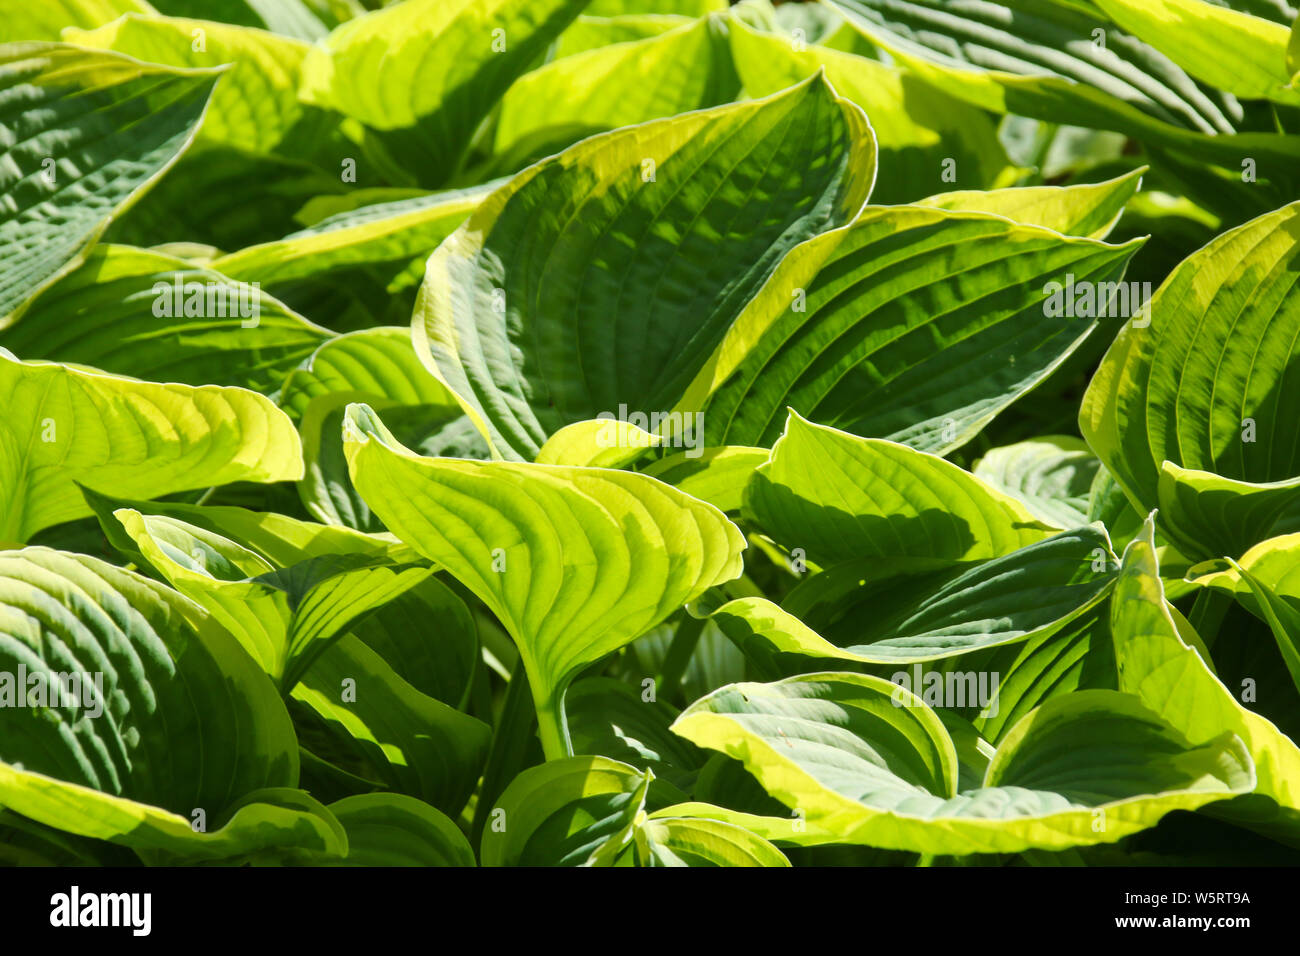 Close up detail in fresh green ornamental hosta leaves growing in a formal garden to make a natural background Stock Photo